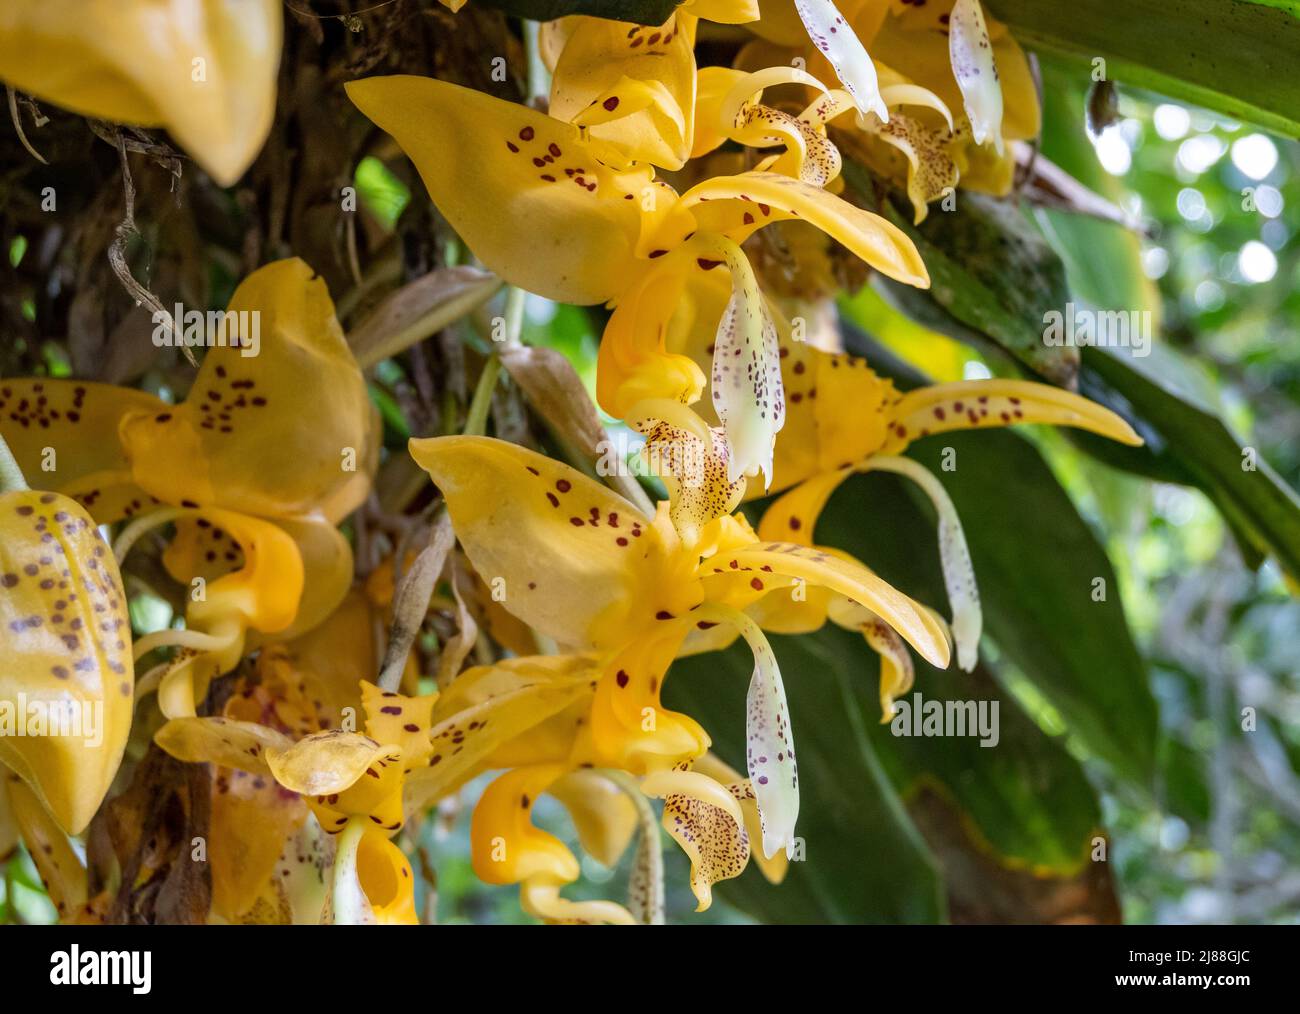 Stanhopea orchid flowers in full bloom. Colombia, South America. Stock Photo